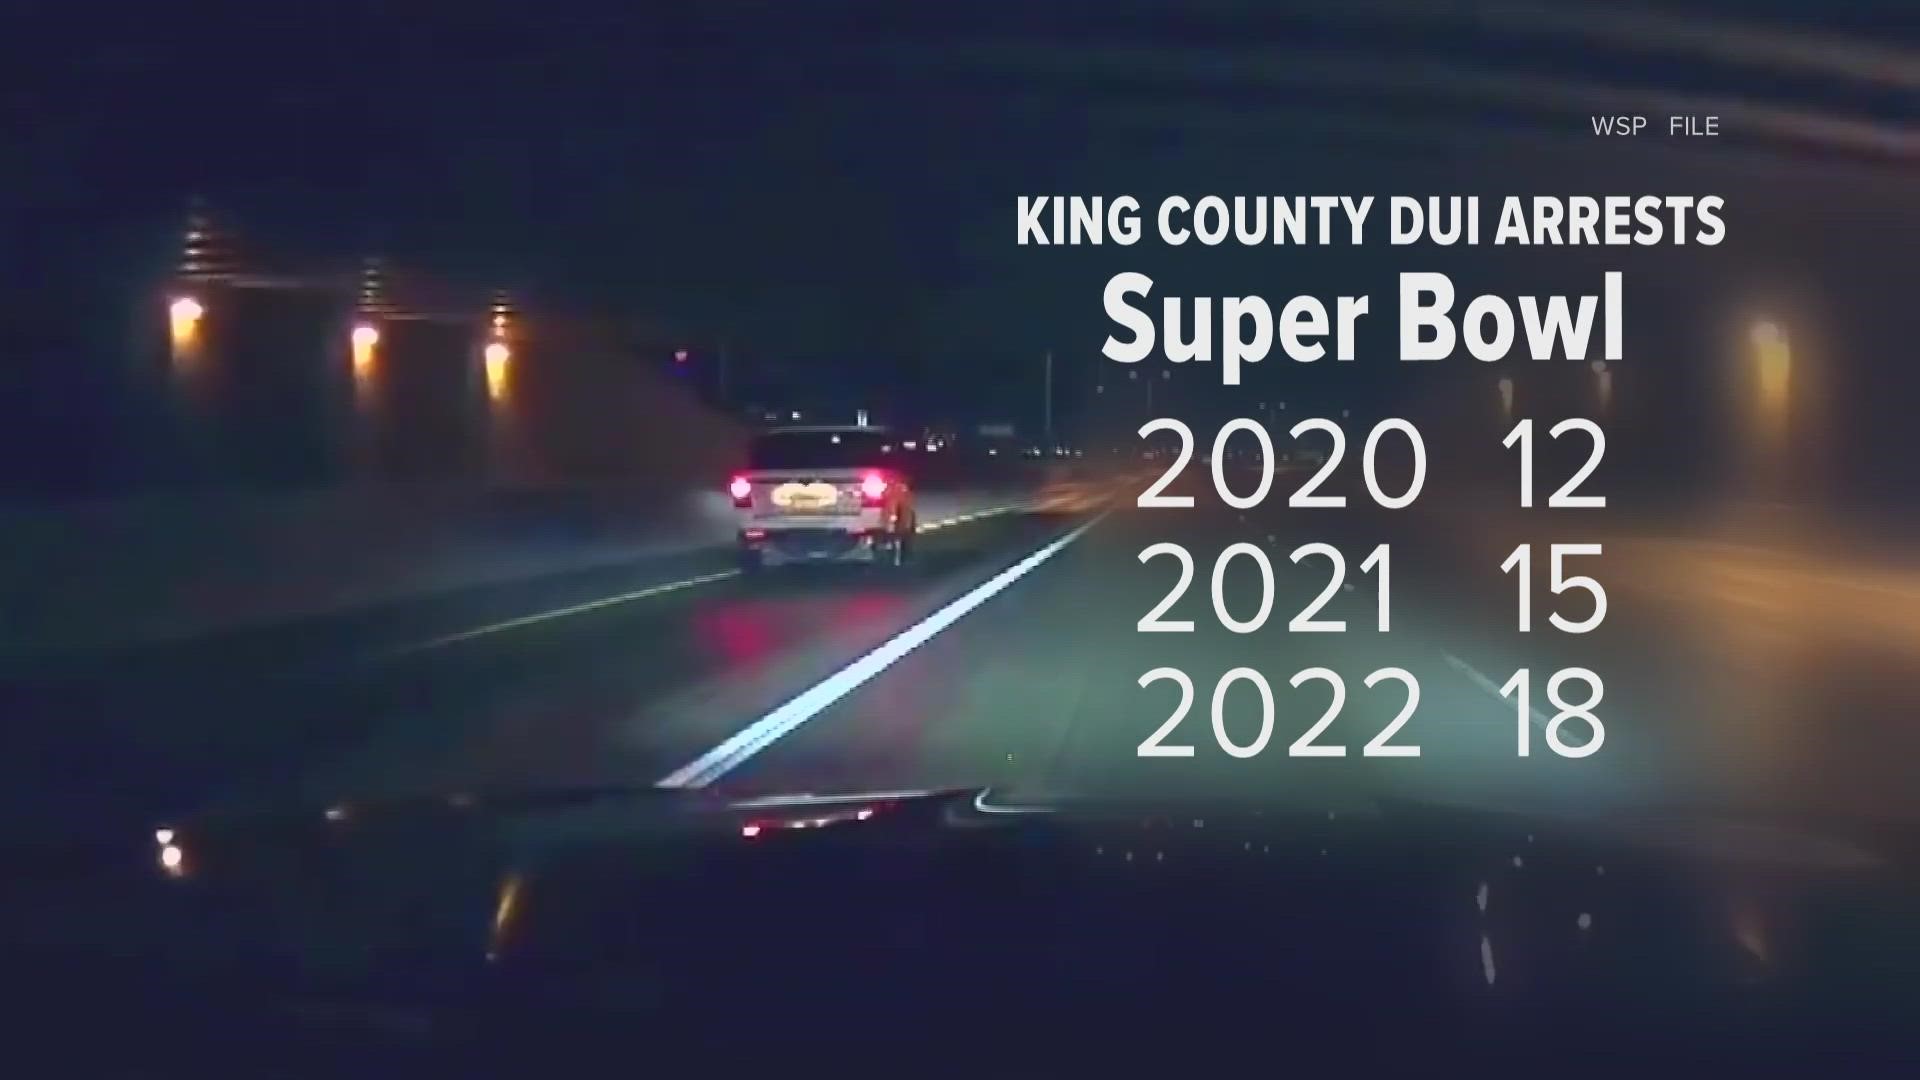 There were 35 total DUI arrests across the state as of 5:00 p.m. on this Super Bowl Sunday, according to the Washington State Patrol.